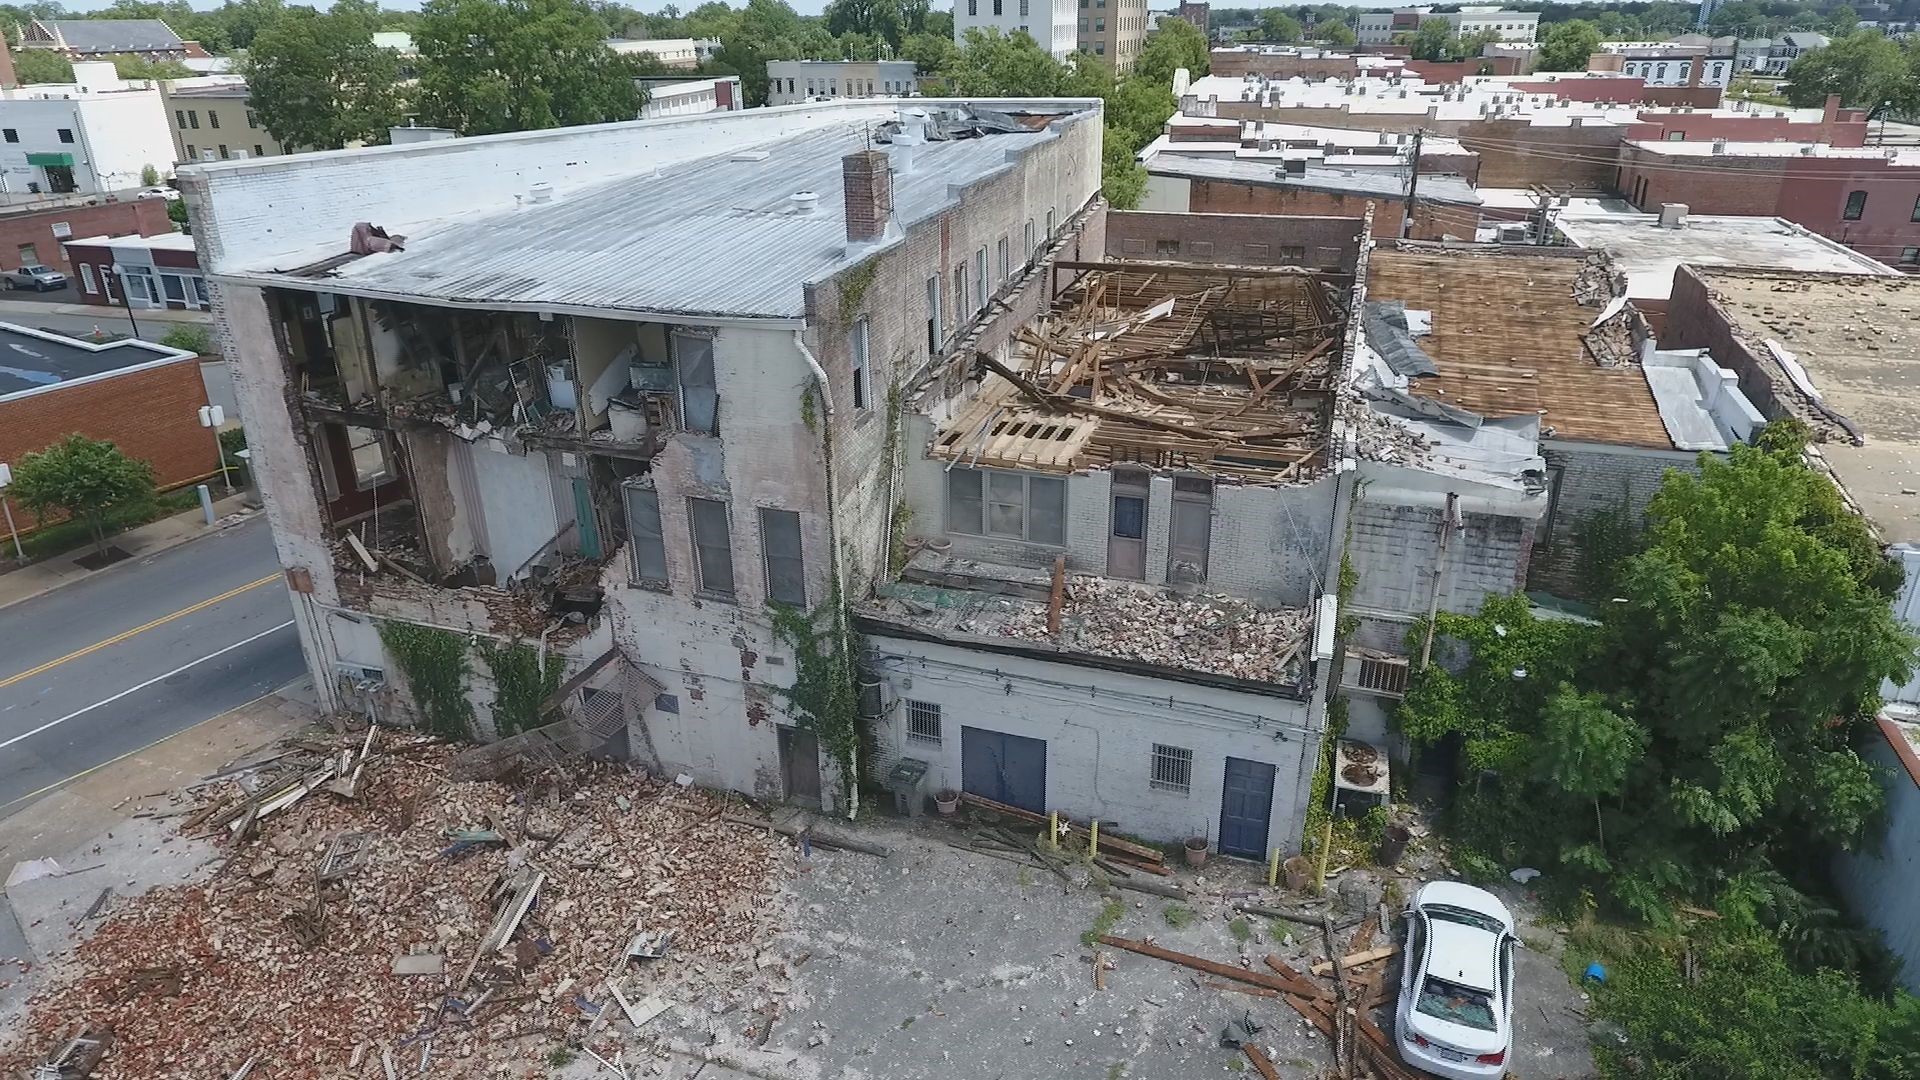 Drone footage showing extensive damage caused by Tropical Storm Isaias in Downtown Suffolk on August 4, 2020.